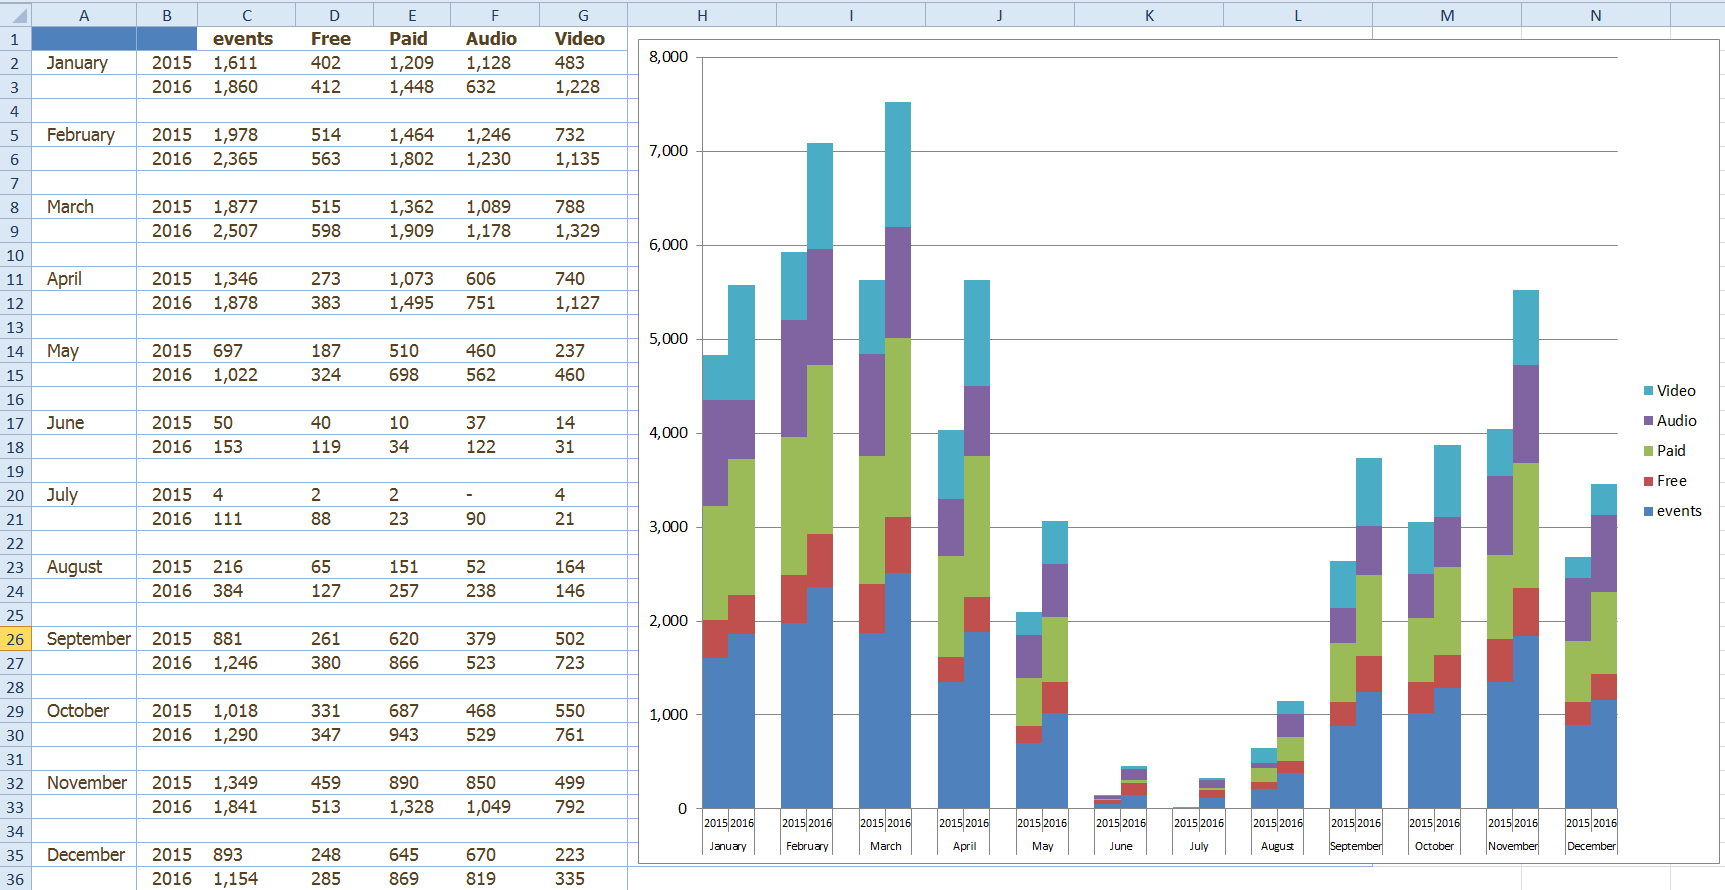 Clustered Stacked Column Chart by Month Year